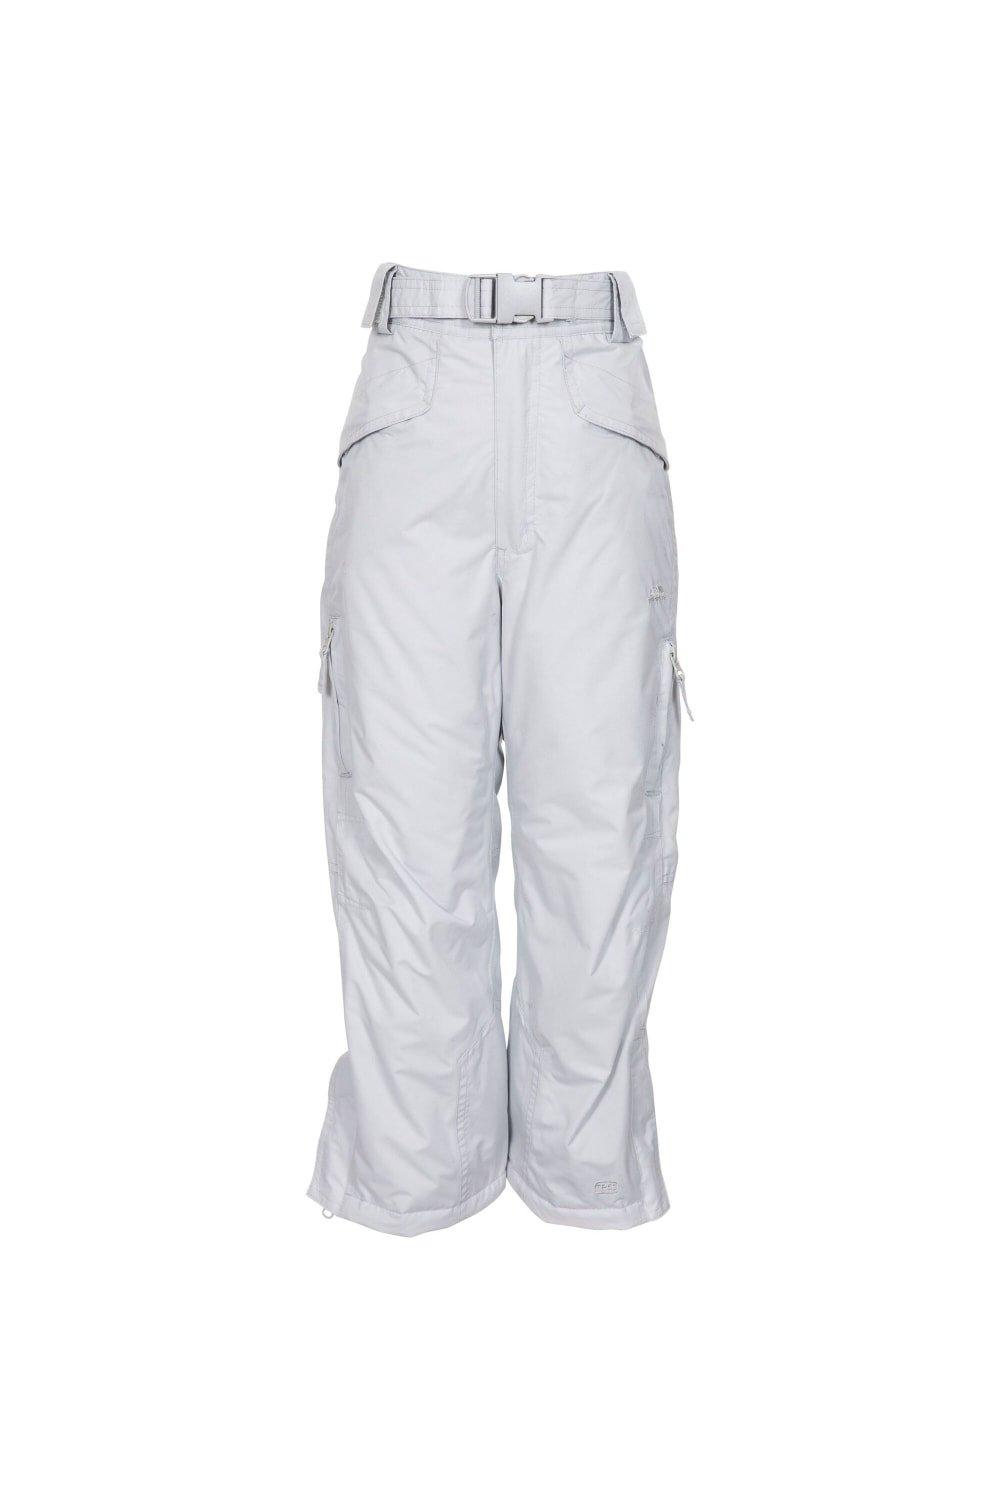 Marvelous Insulated Ski Trousers